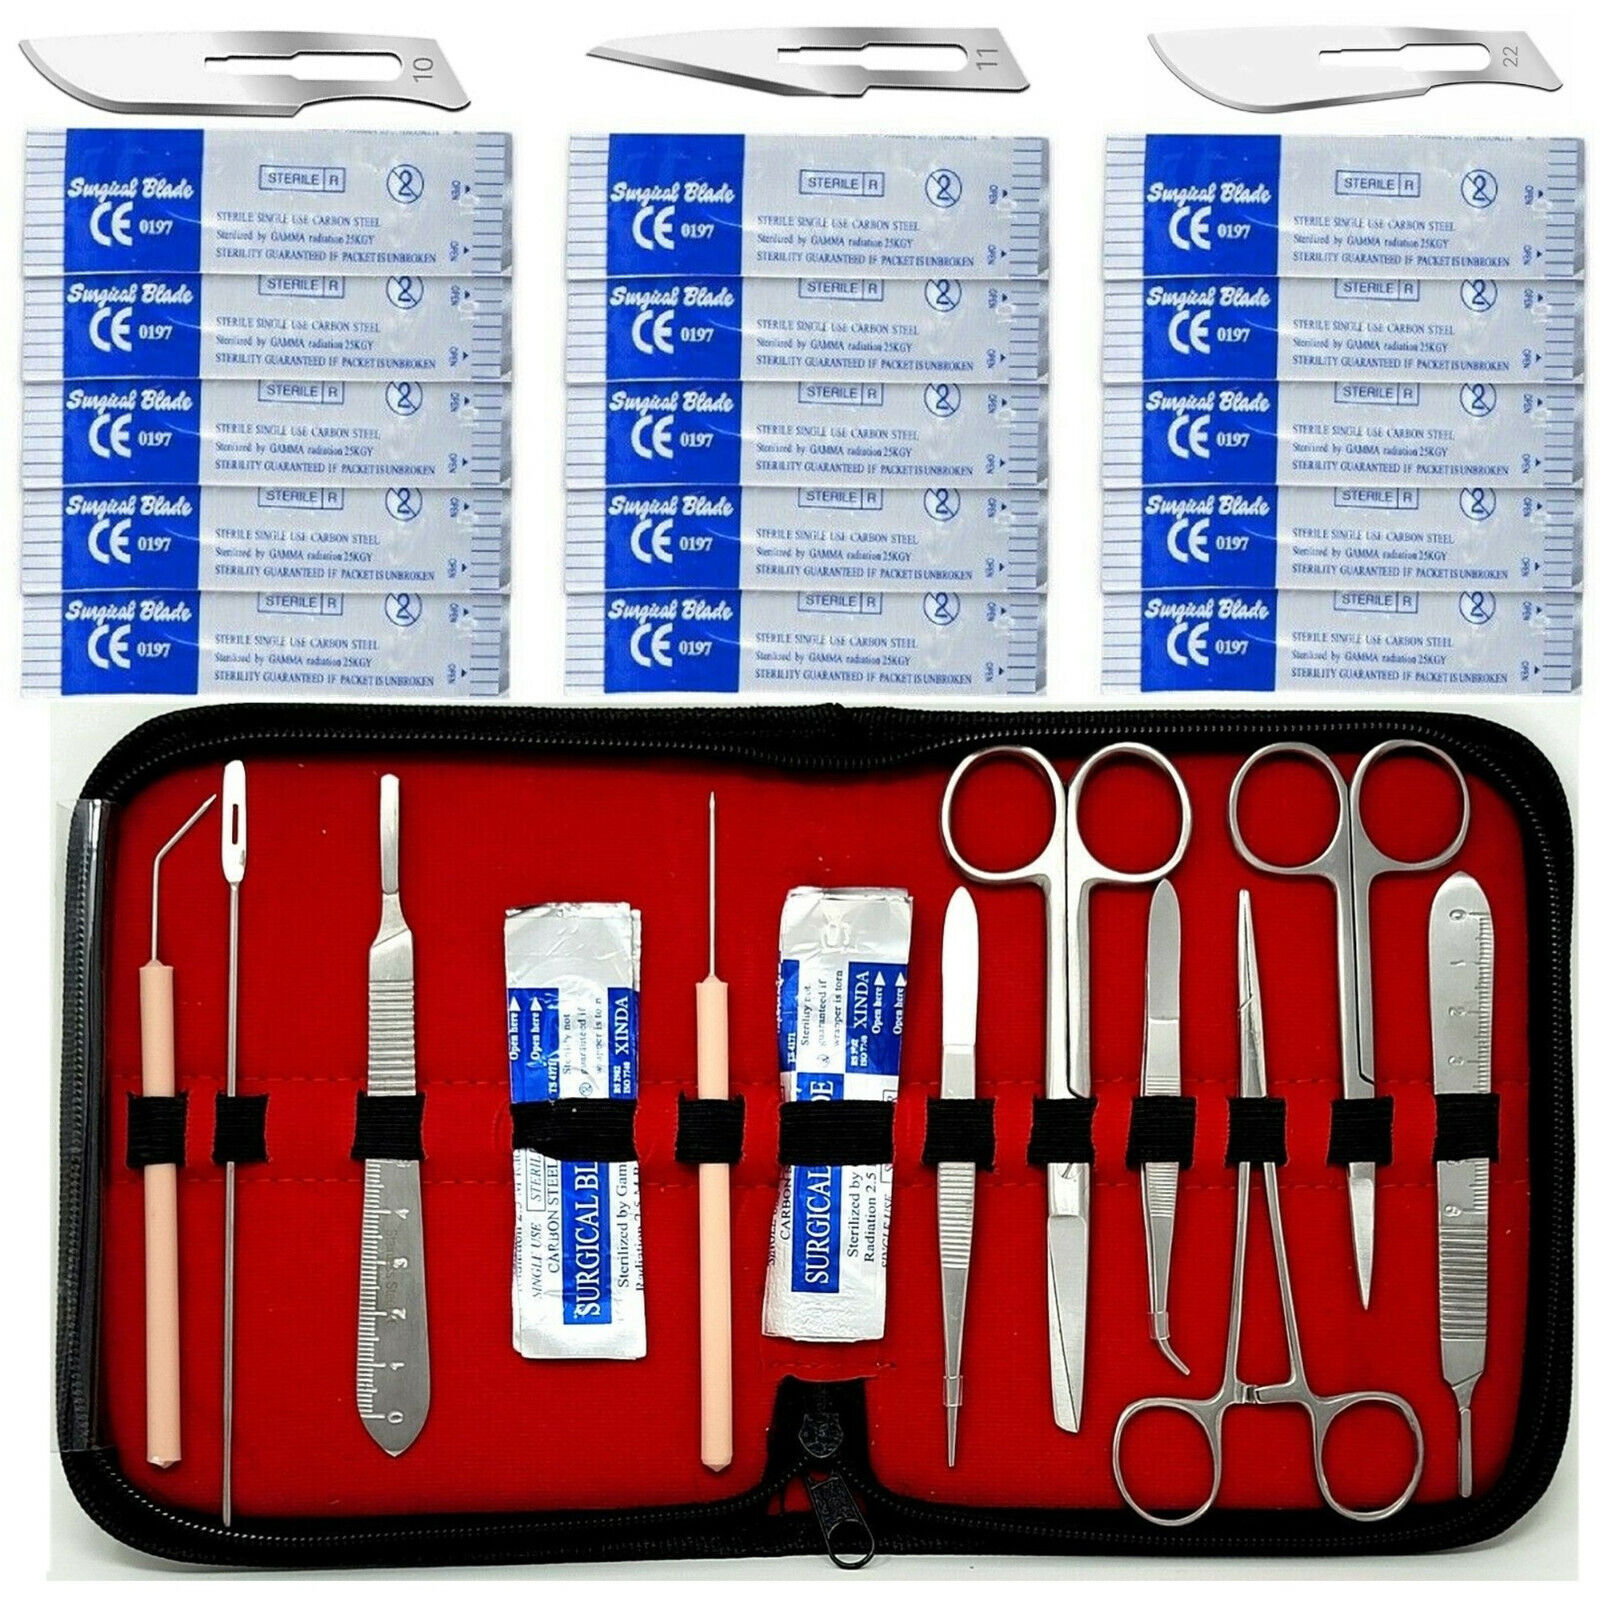 Surgical Suture Kit Basic First Aid Set Suture Emergency Trauma Survival Pack HTI Does Not Apply - фотография #2